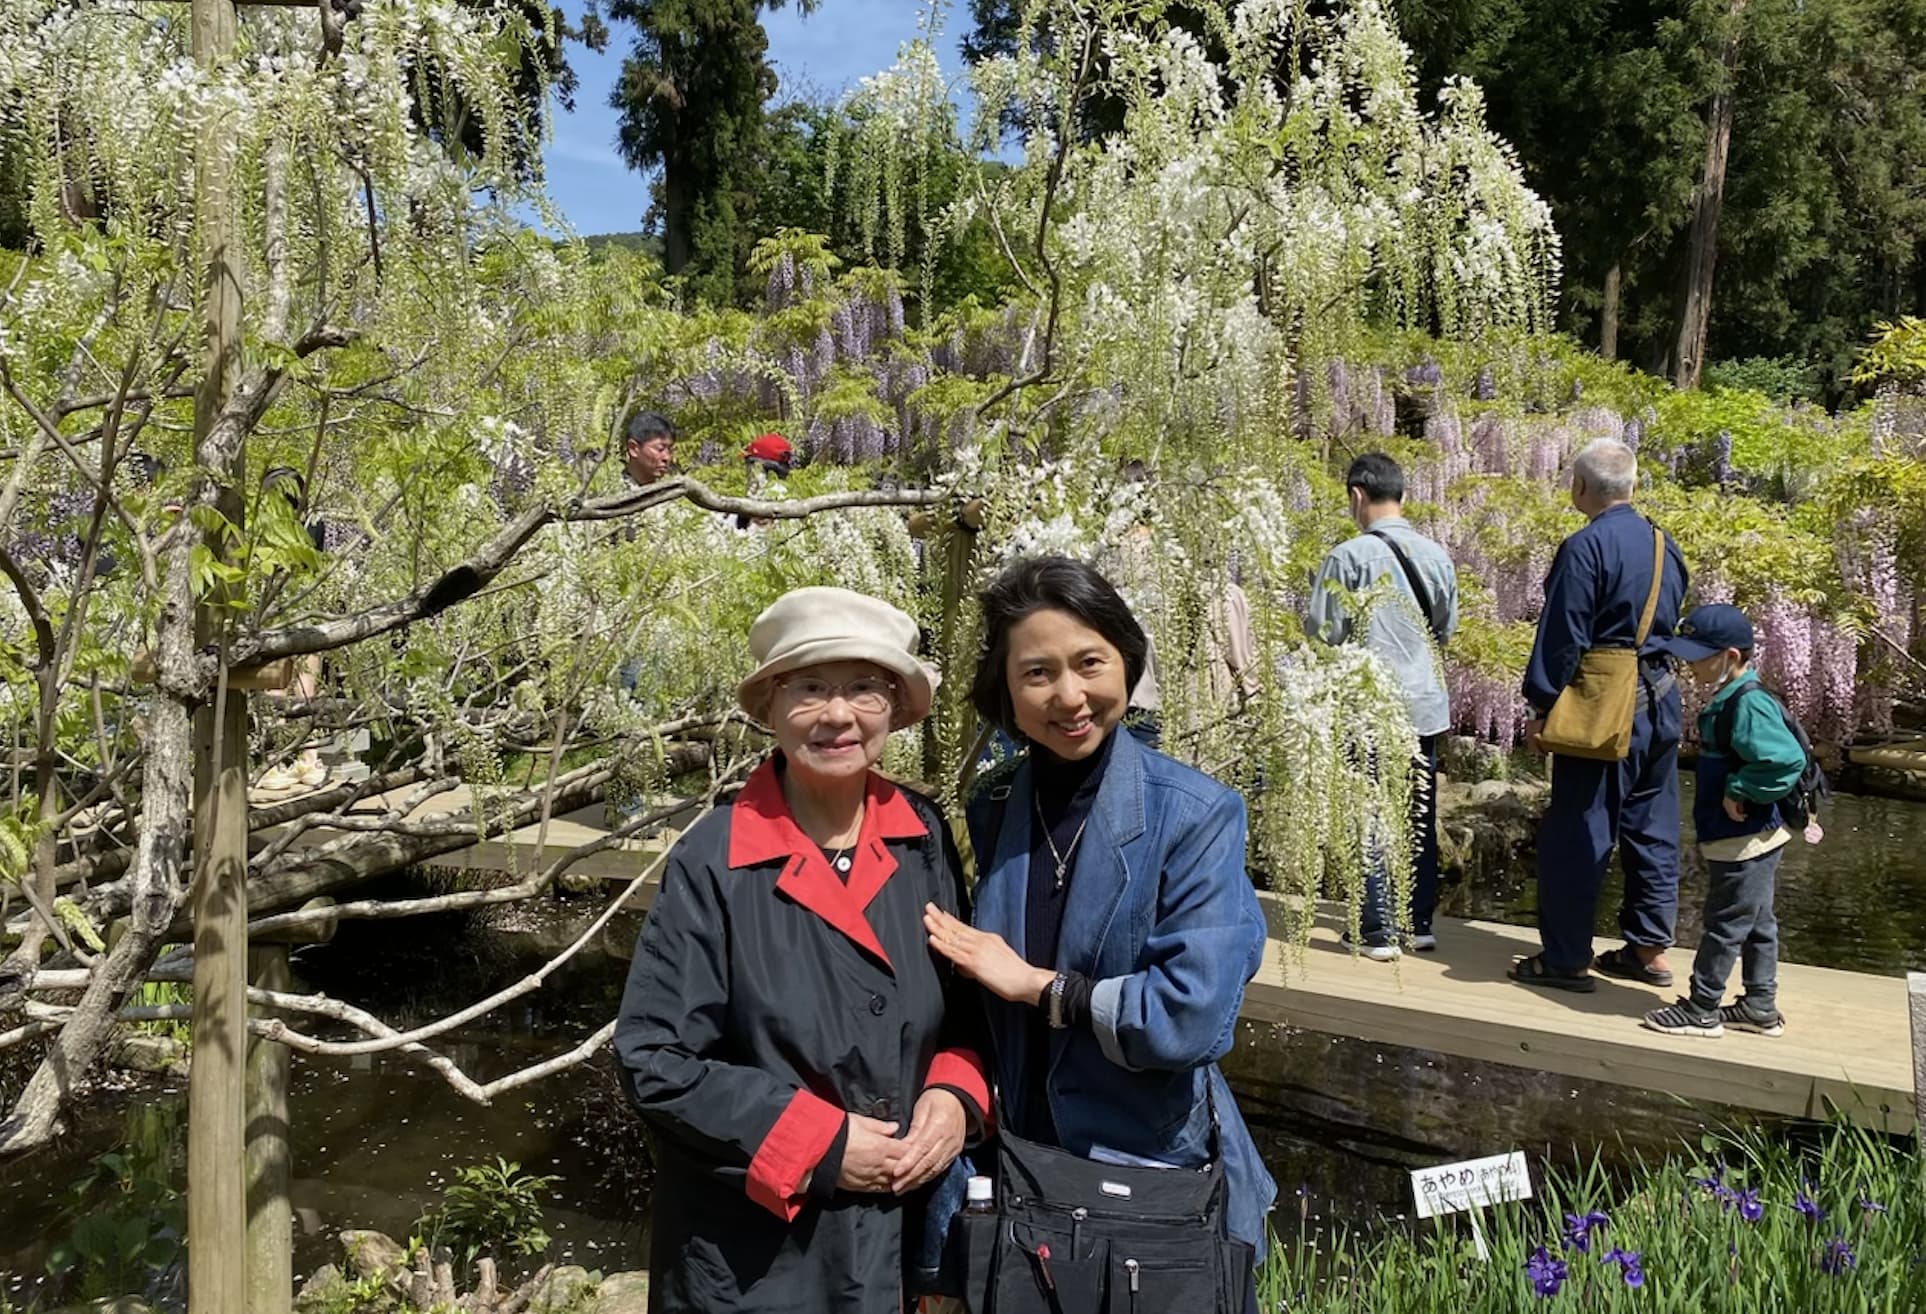 85-year-old Japanese moms 5 rules for a long, happy life Complaining only leads to more complaints